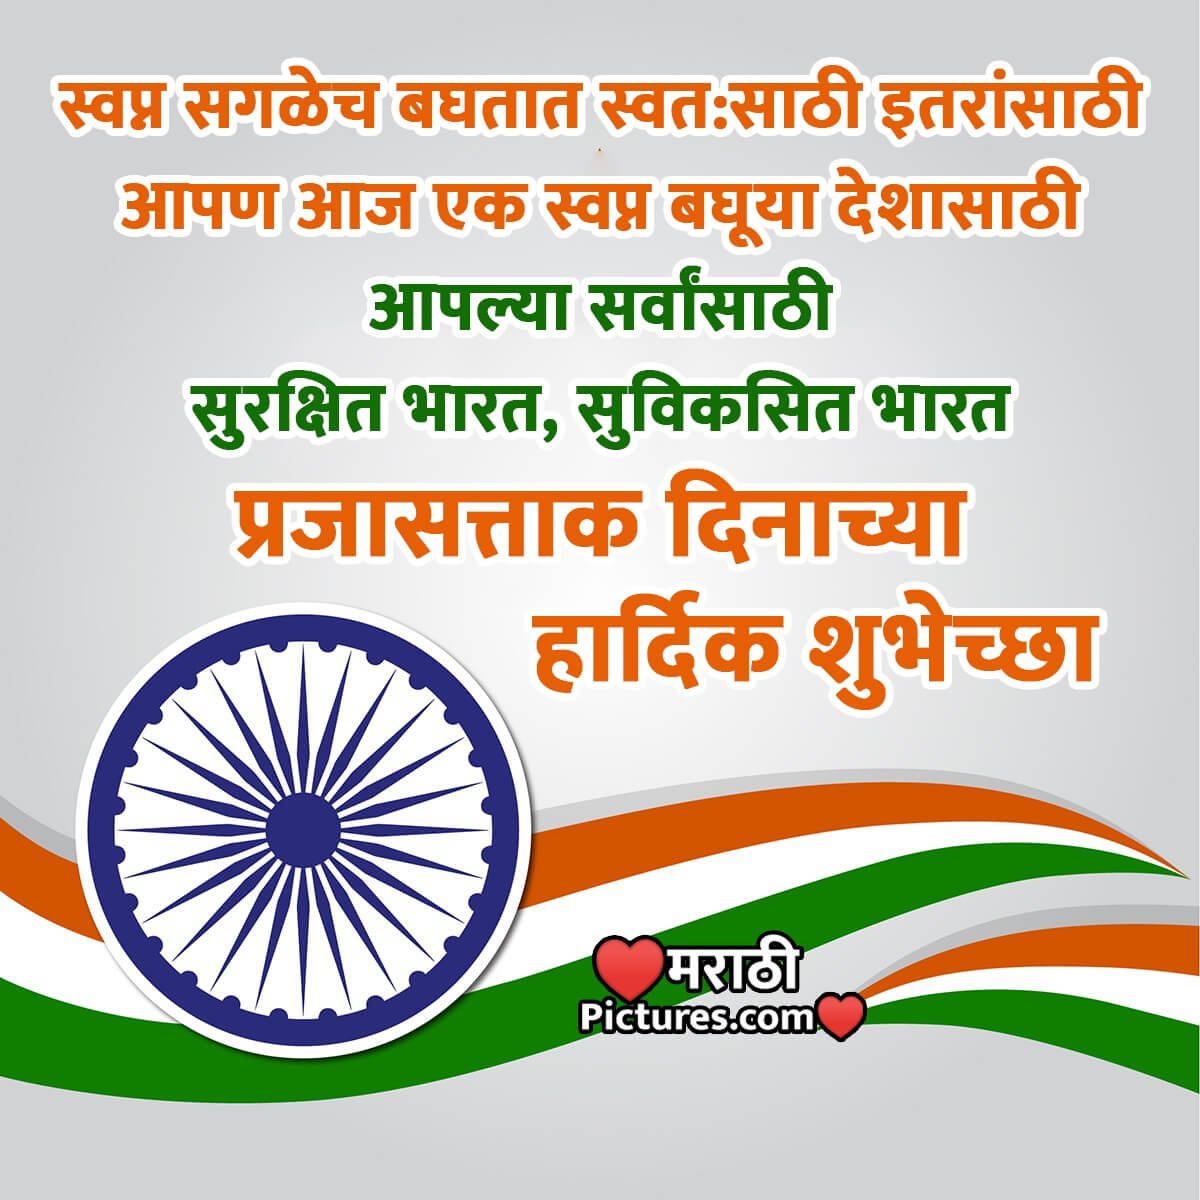 Republic Day Messages In Marathi